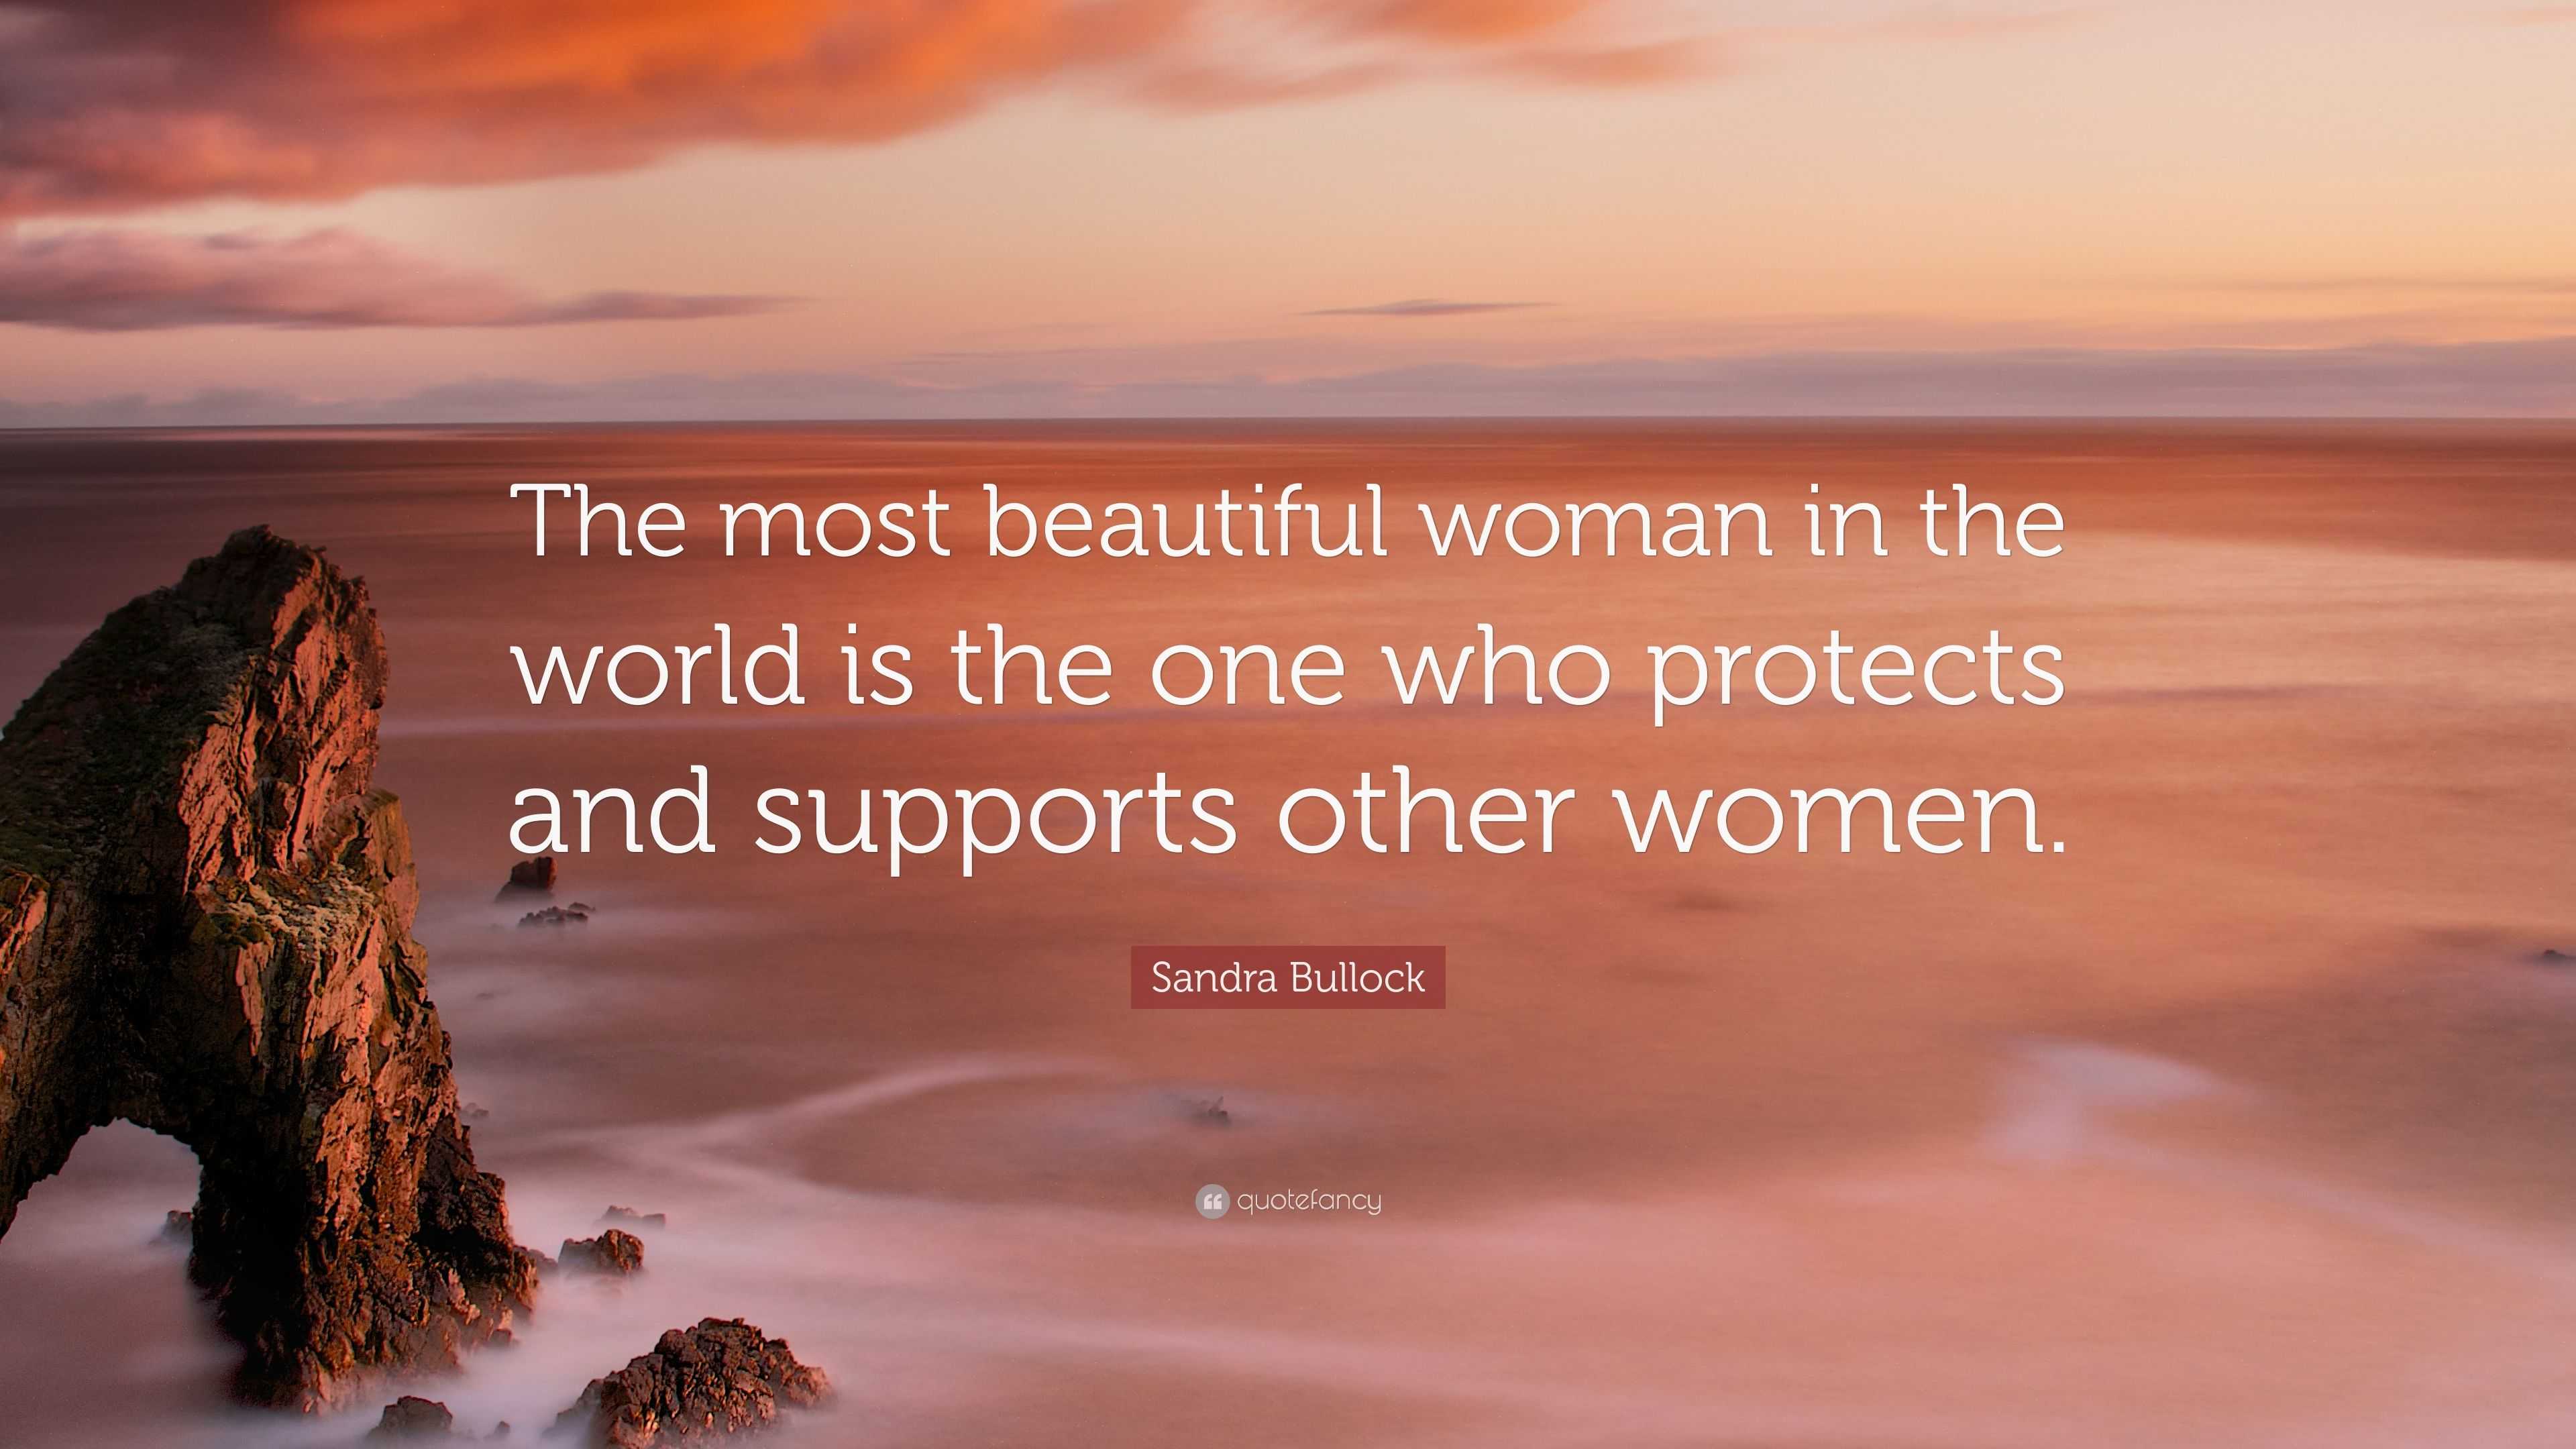 Sandra Bullock Quote “The most beautiful woman in the